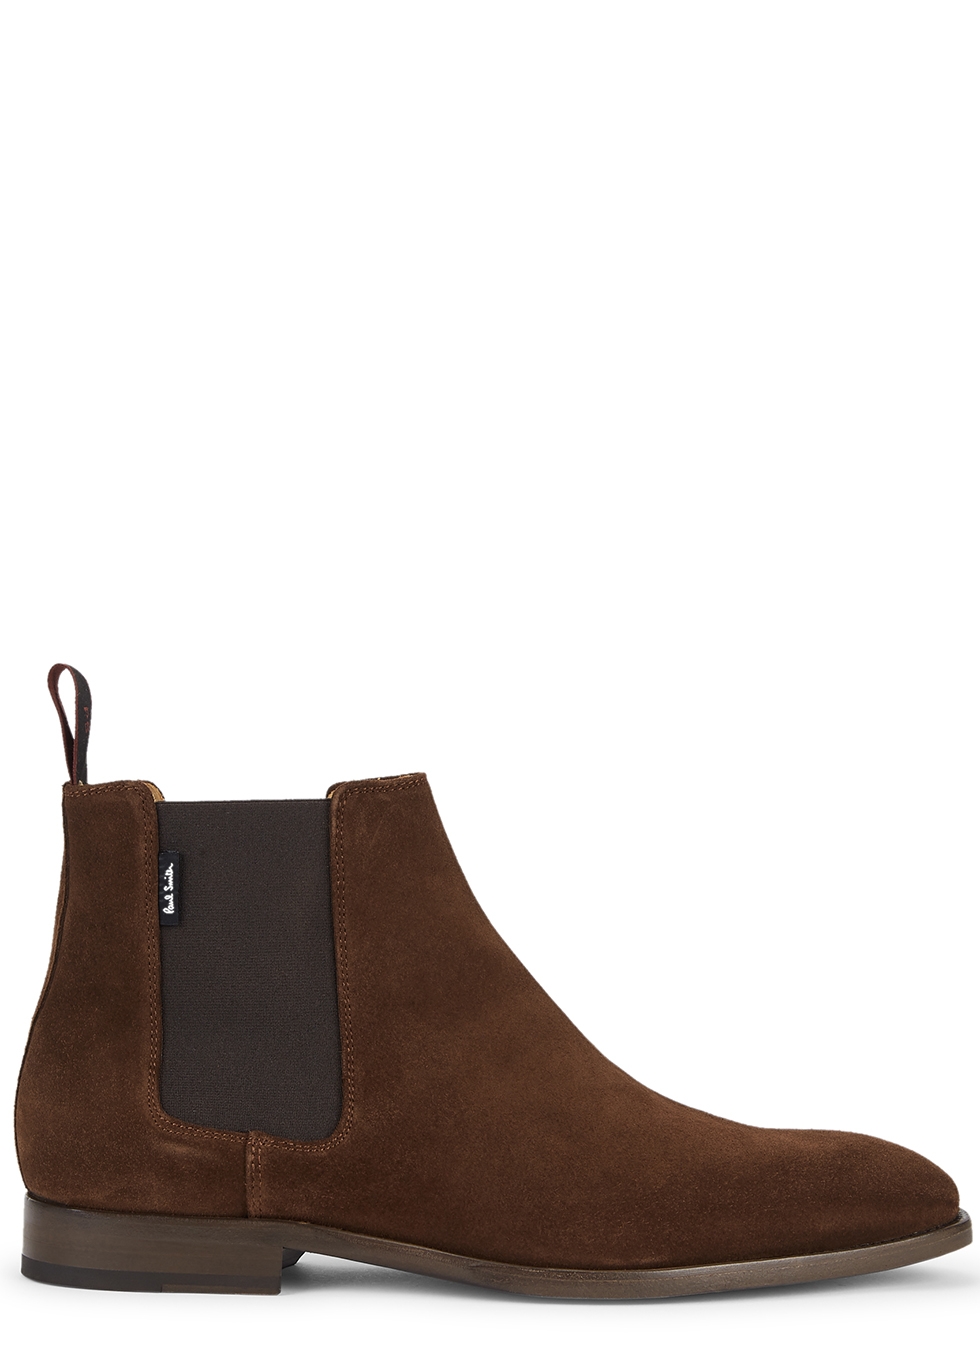 paul smith black suede chelsea boots